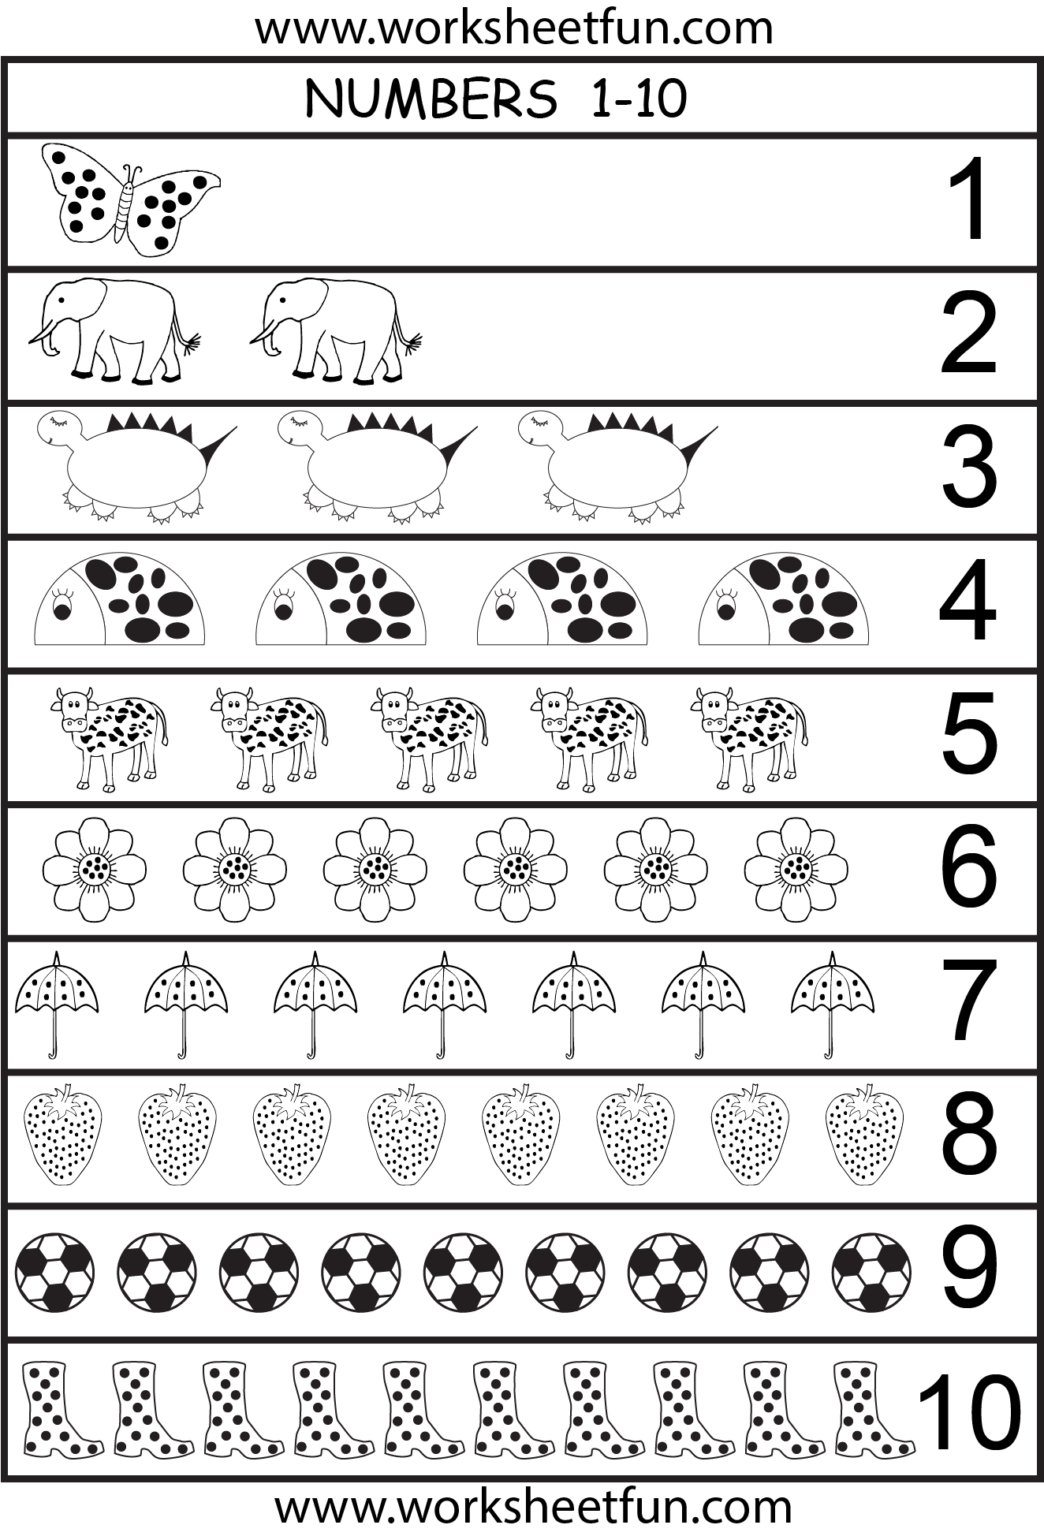 First count. Numbers 1-10 count. Count 1-10 Worksheets for Kids. Numbers 1-10 Worksheets for preschoolers. Numbers 1-10 Tracing Worksheets for Kids.